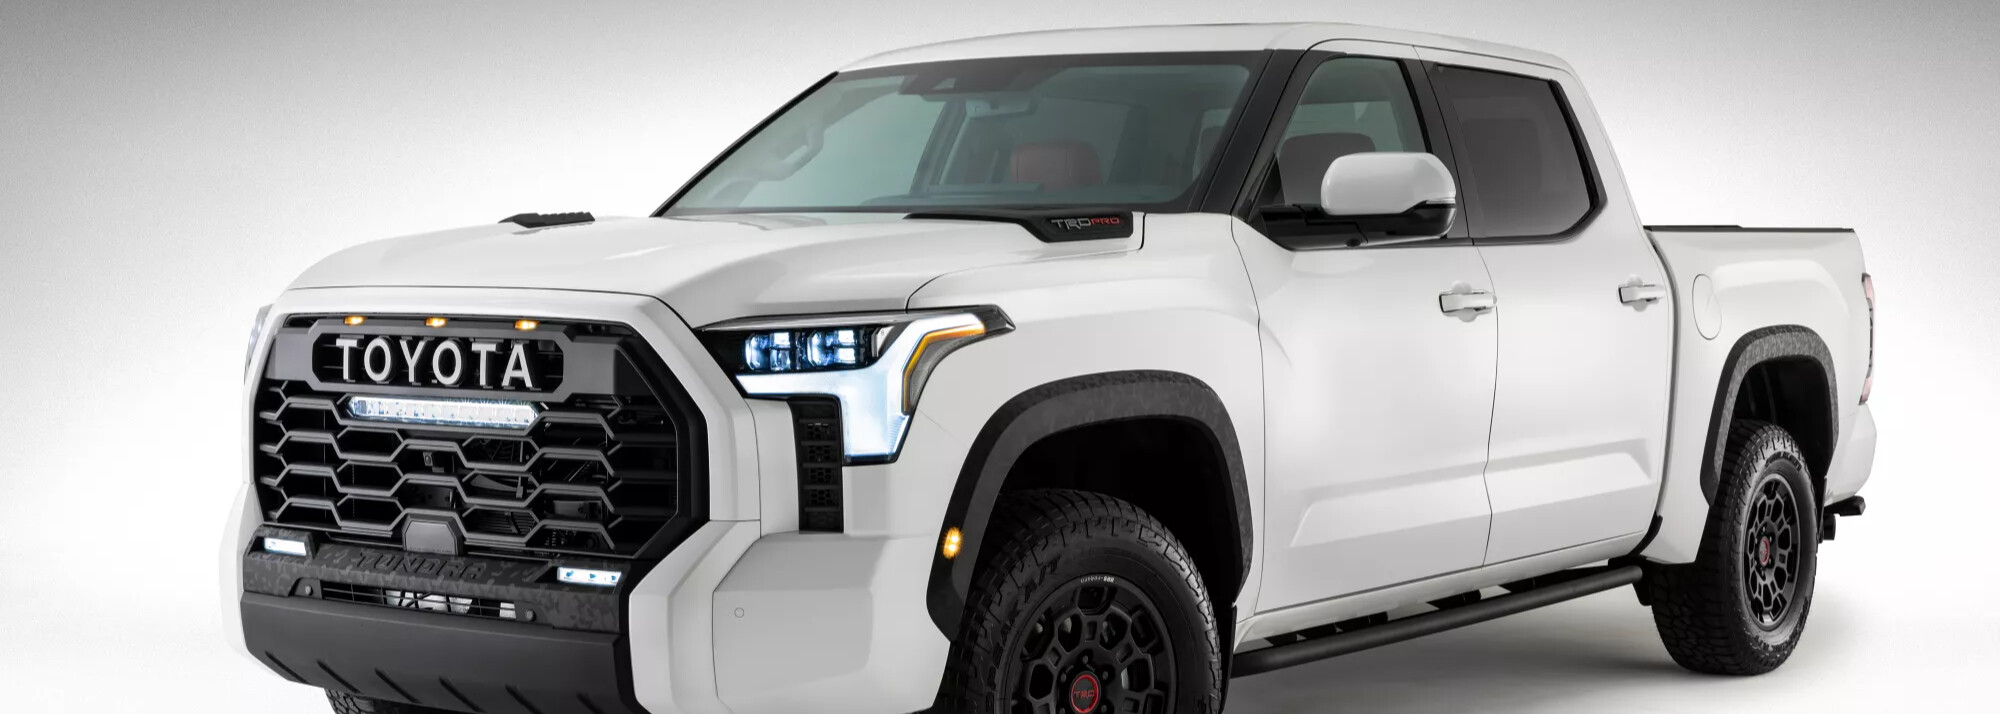 Introducing the 2022 Toyota Tundra ...